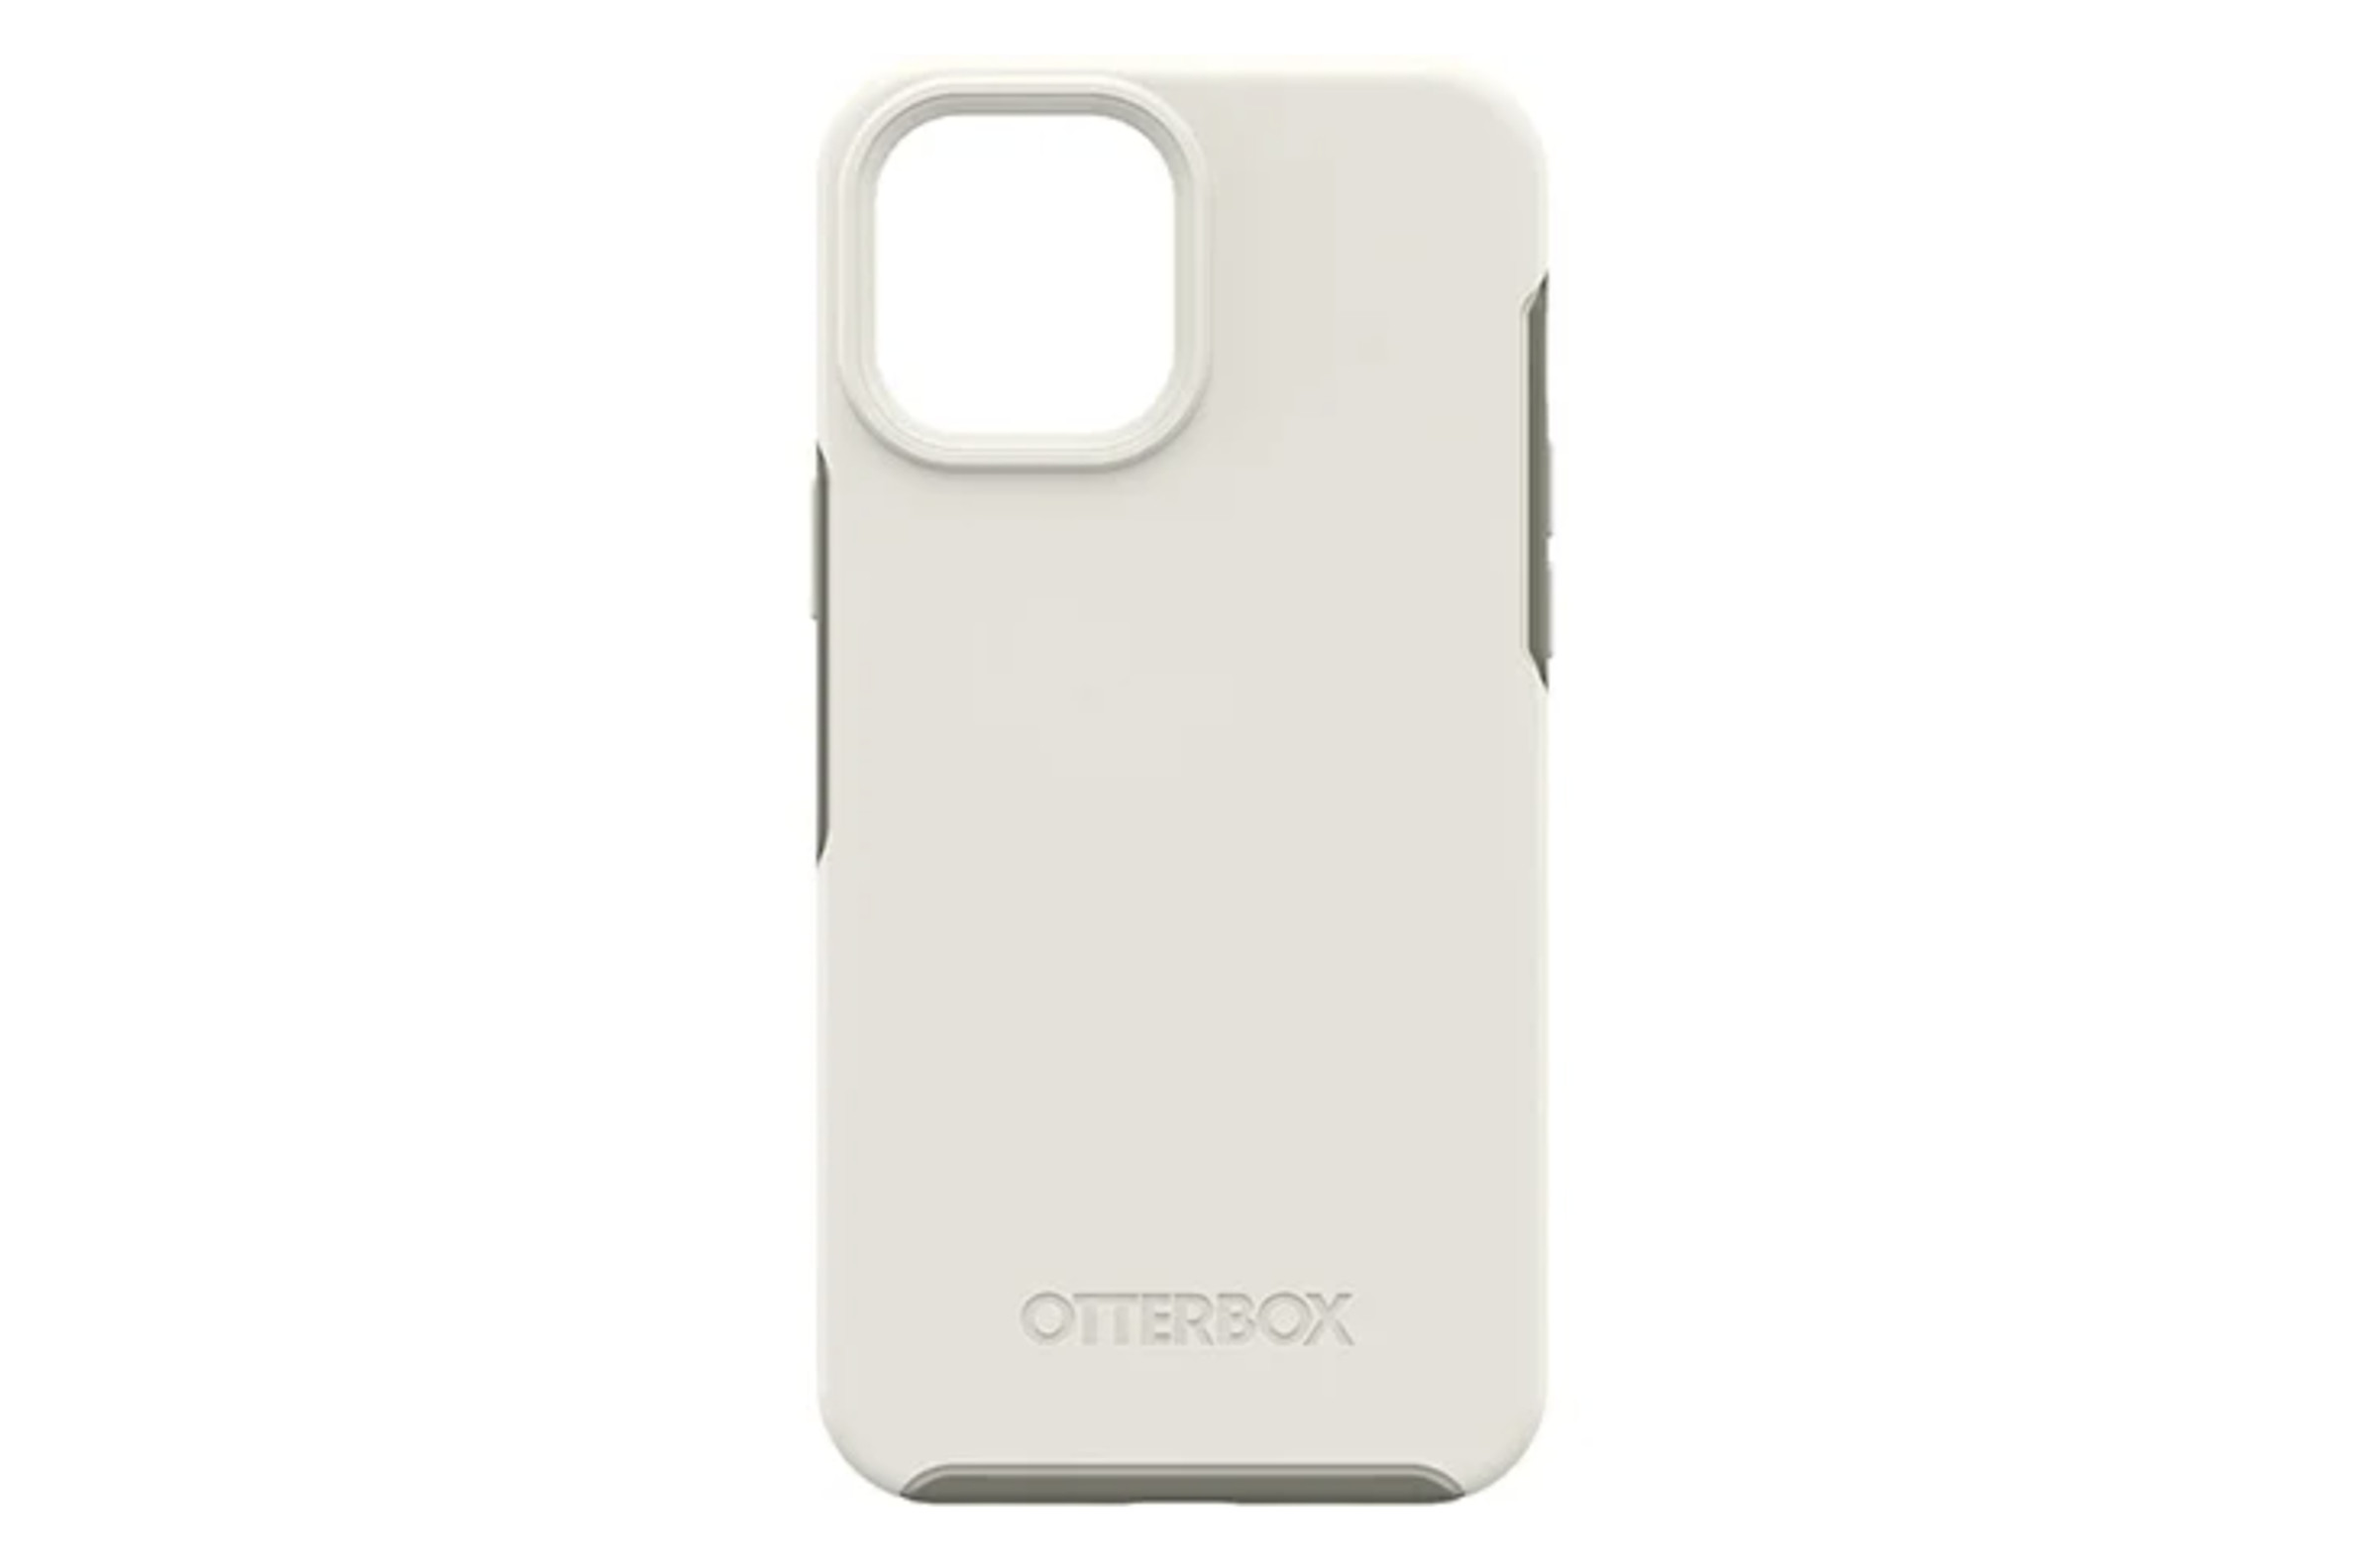 Otterbox’s Symmetry Series Plus case with MagSafe